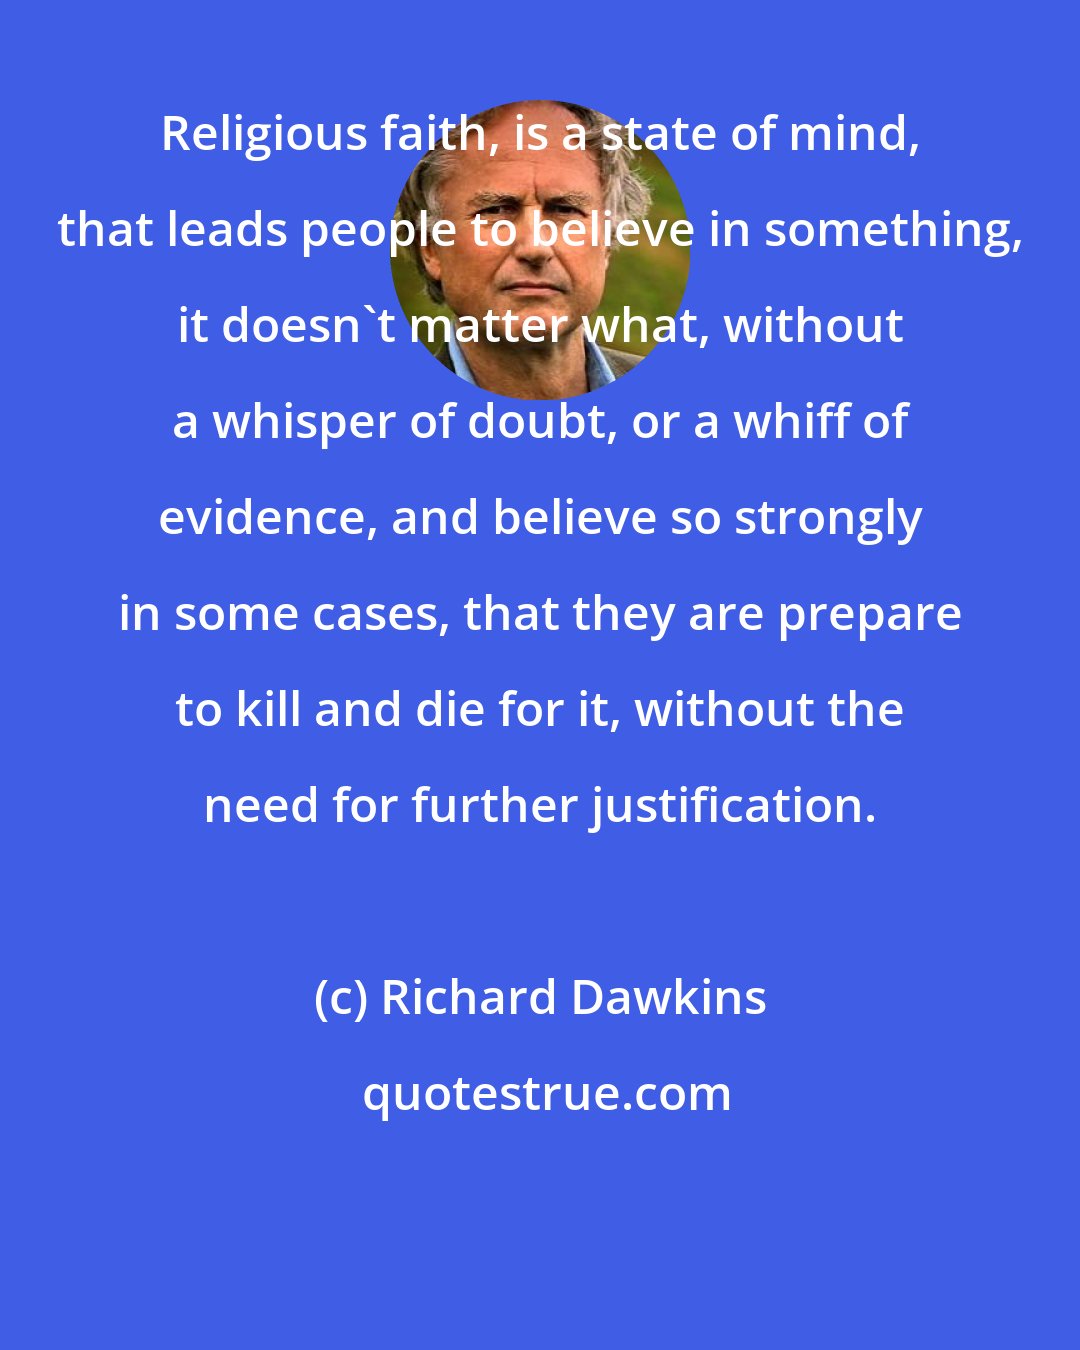 Richard Dawkins: Religious faith, is a state of mind, that leads people to believe in something, it doesn't matter what, without a whisper of doubt, or a whiff of evidence, and believe so strongly in some cases, that they are prepare to kill and die for it, without the need for further justification.